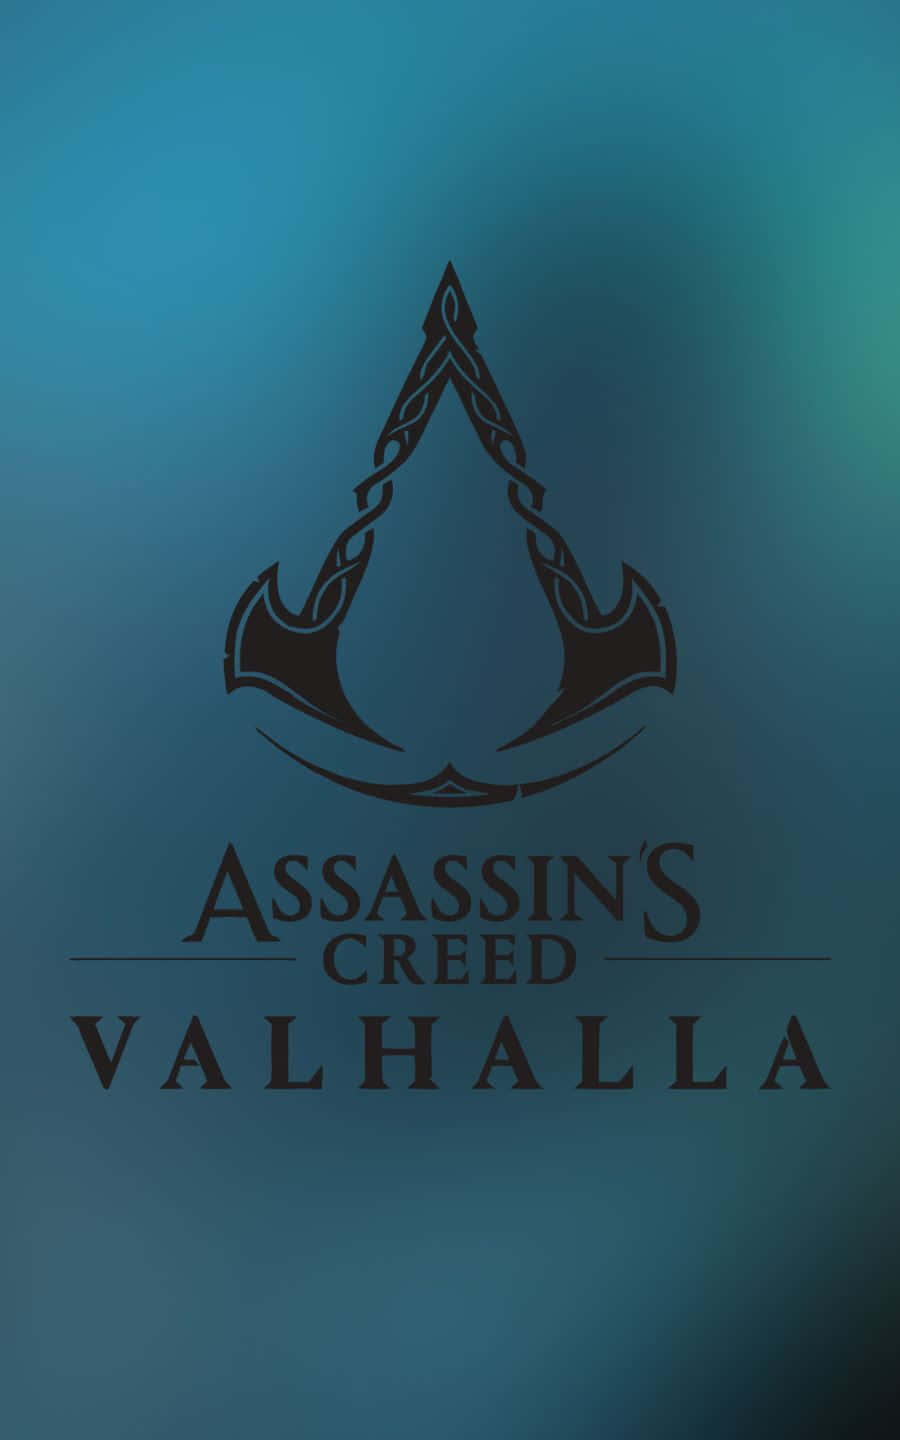 Game Title And Logo 1440p Assassin's Creed Valhalla Background